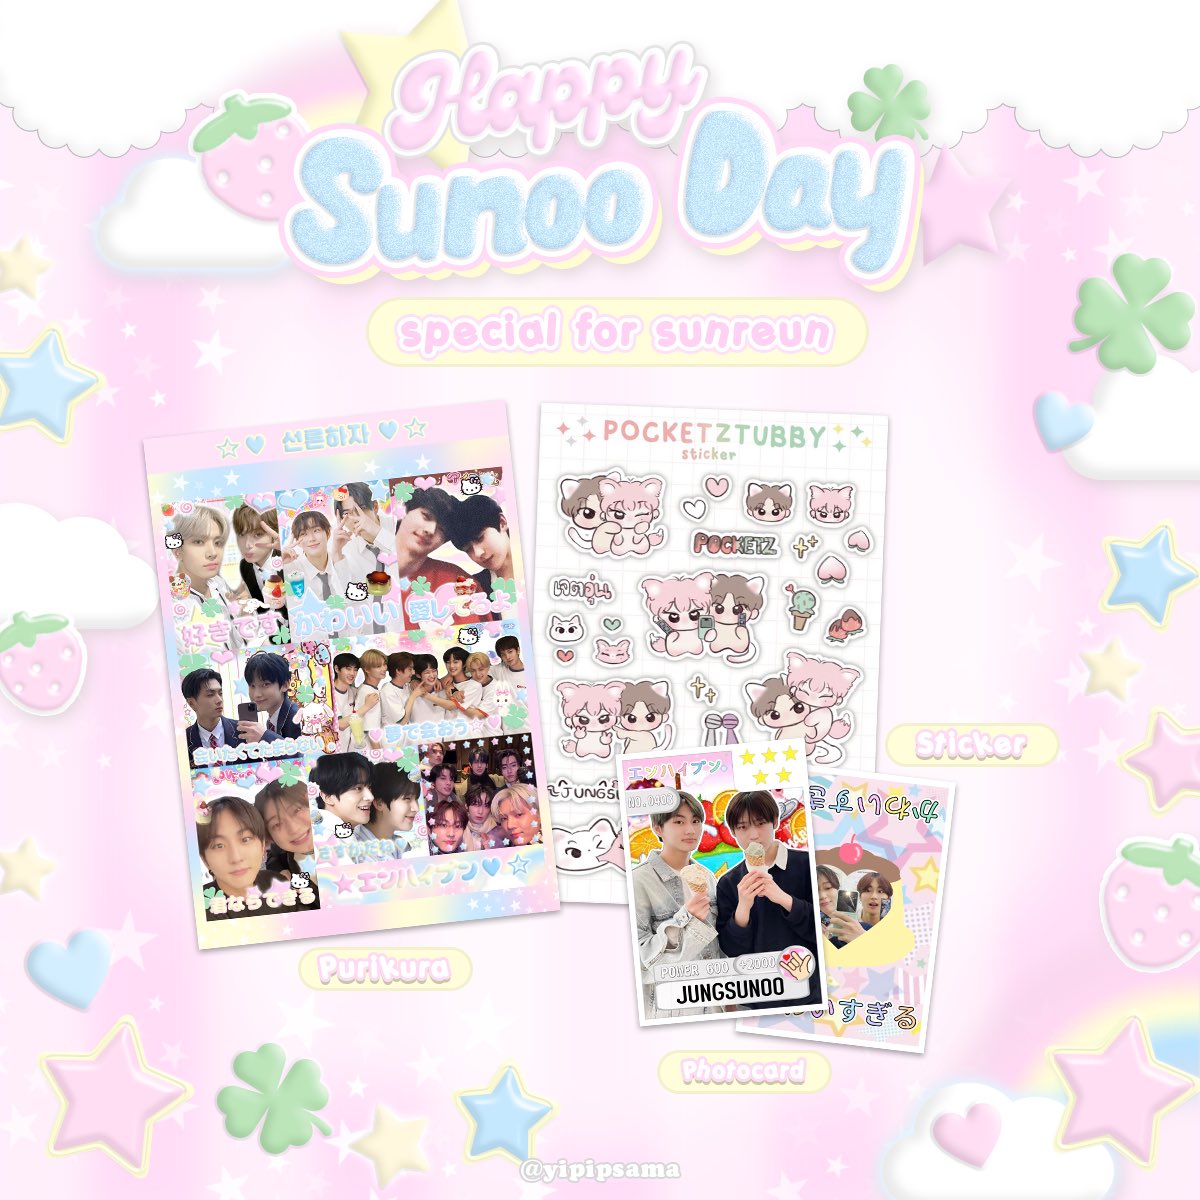 pls kindly rt 
g𝒾ve away ꒰ᐢ. .ᐢ꒱  
 #happysunooday #sunoo #선우 

𐙚 Hair clip
𐙚 mini standy 
𐙚 id card
𐙚 sticker
— special gift for #allsunoo #양썬 
𐙚 sticker a6 allsunoo
𐙚 sticker a6 jungsun
𐙚 photocard jungsun

• 📍: tba 

gg form on 24/06 20:00 pm
(10 sets)